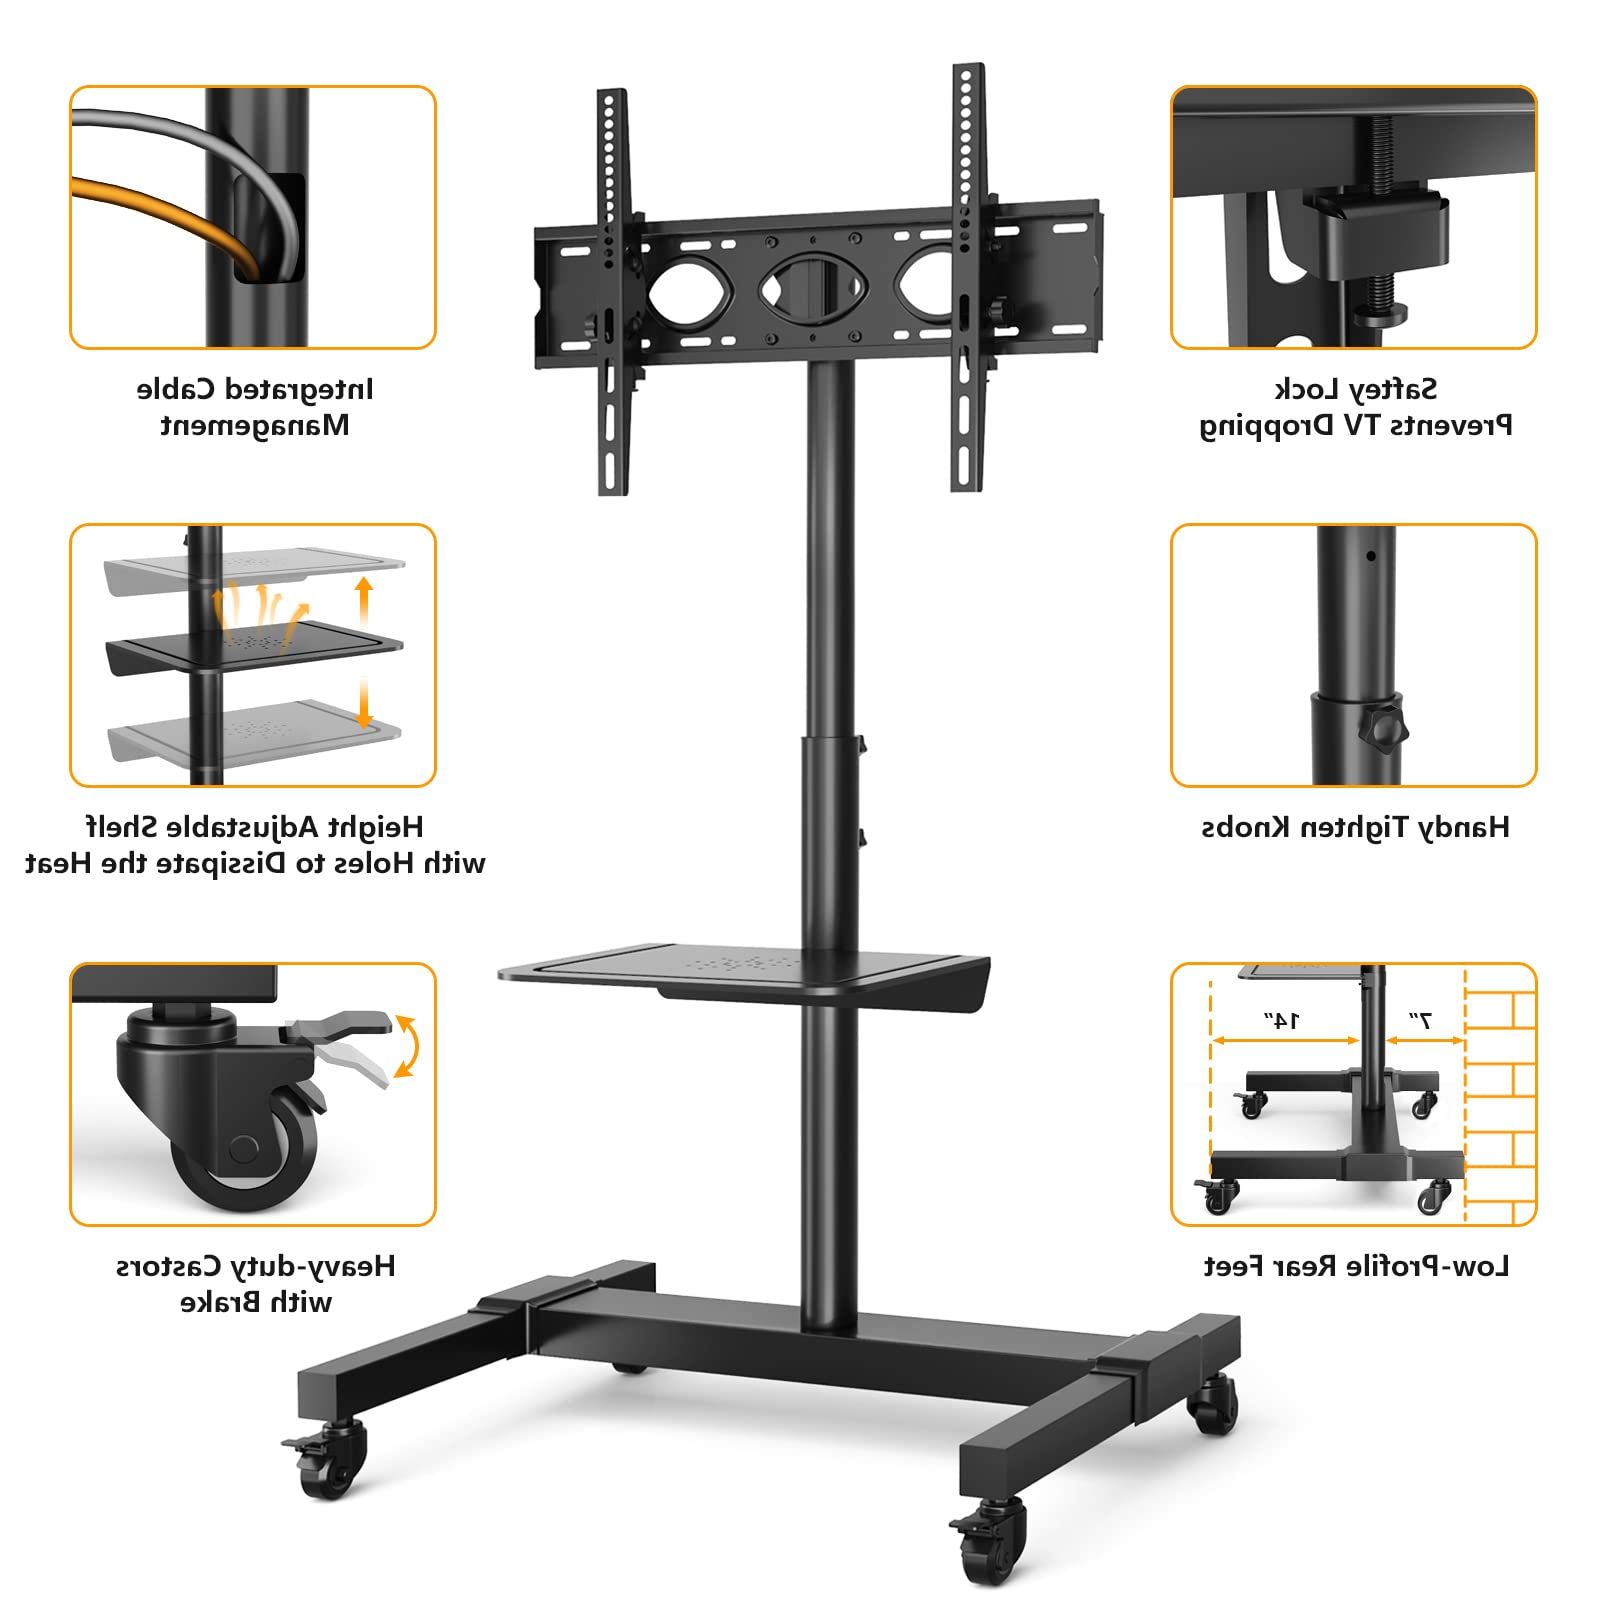 Mobile Tilt Rolling Tv Stands Intended For Well Known Buy Large Rolling Tv Stand Mobile Portable Cart Stand For 32 75 Inch (View 11 of 15)